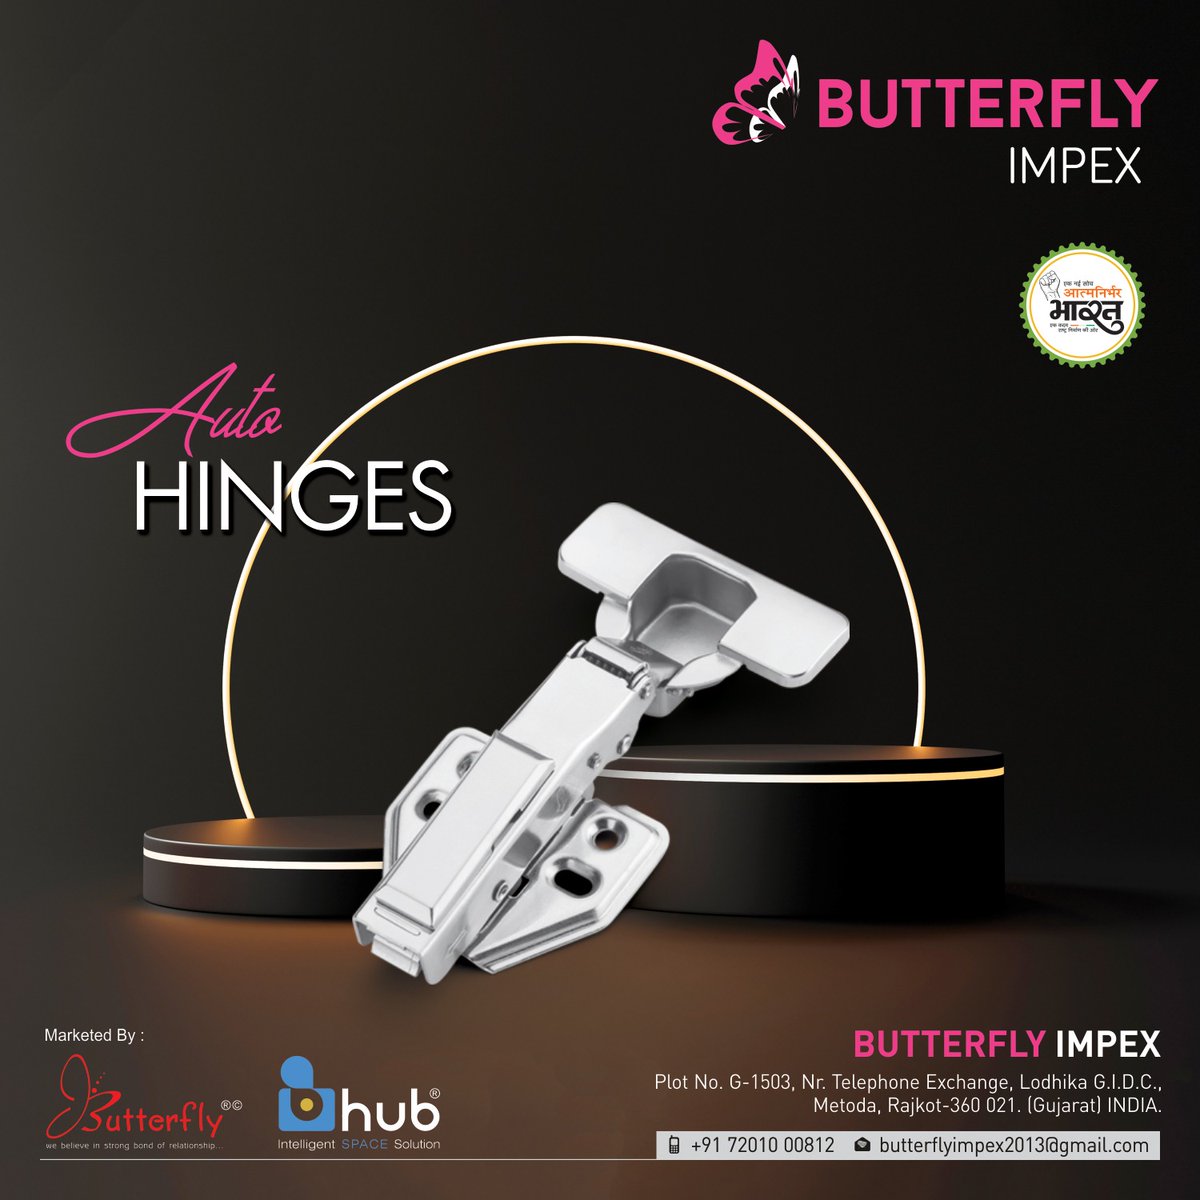 From cabinets to doors, our auto hinges fit seamlessly into any space.

Butterfly Impex (Rajkot)
Contact: Mr. Tarun Khant - +91 9586893964
#ButterflyImpex #Rajkot #DoorHardware #AutoHinges #KitchenFittings #KitchenHardware #KitchenSolutions #CabinetHardware